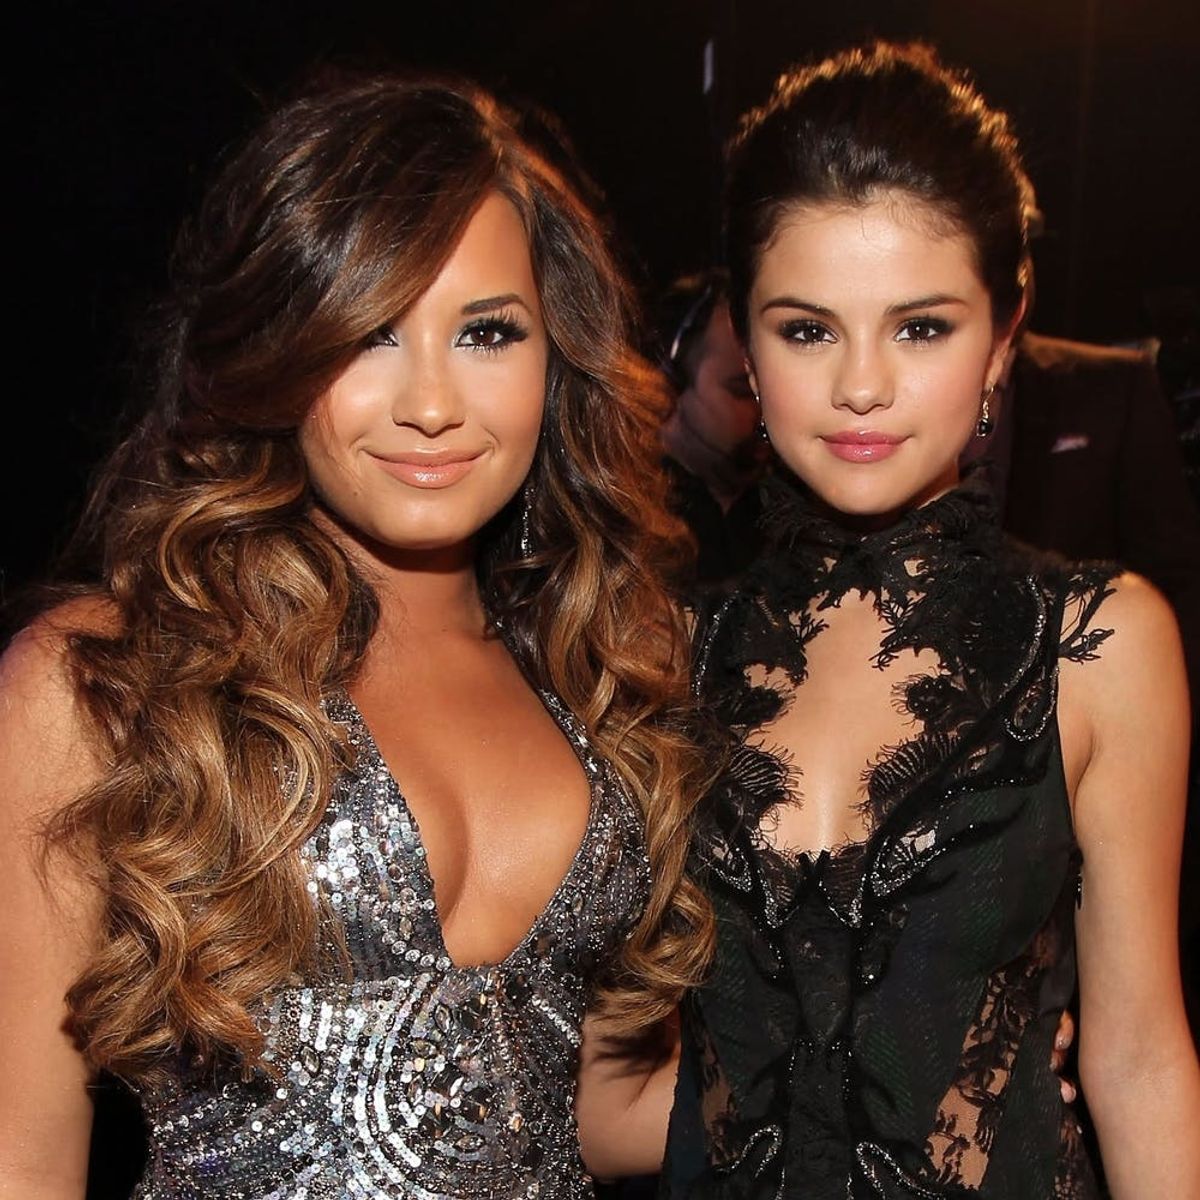 Selena Gomez Just Showed Demi Lovato Some Serious Love for “Simply Complicated”